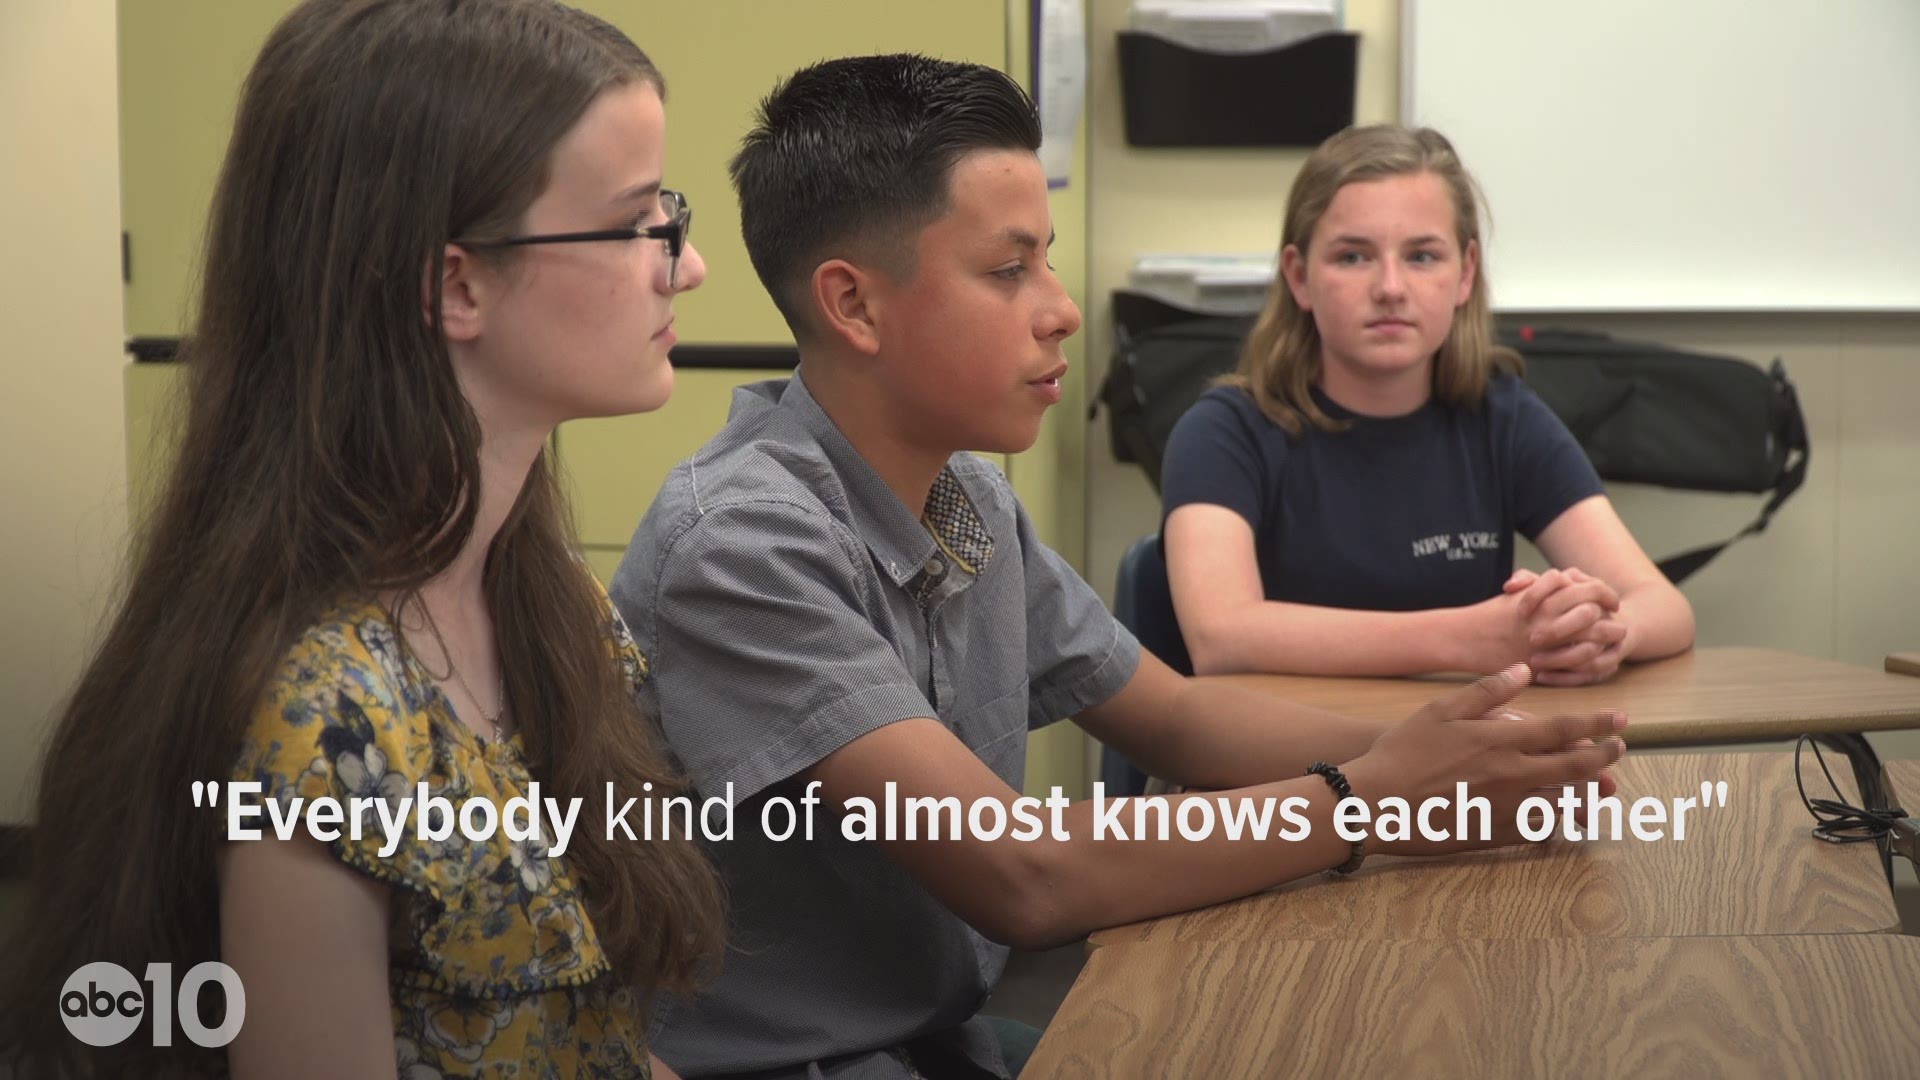 Students from California Middle School talk about how they chose a high school, the influence of friends, and what they'll miss as they prepare for their next chapter.